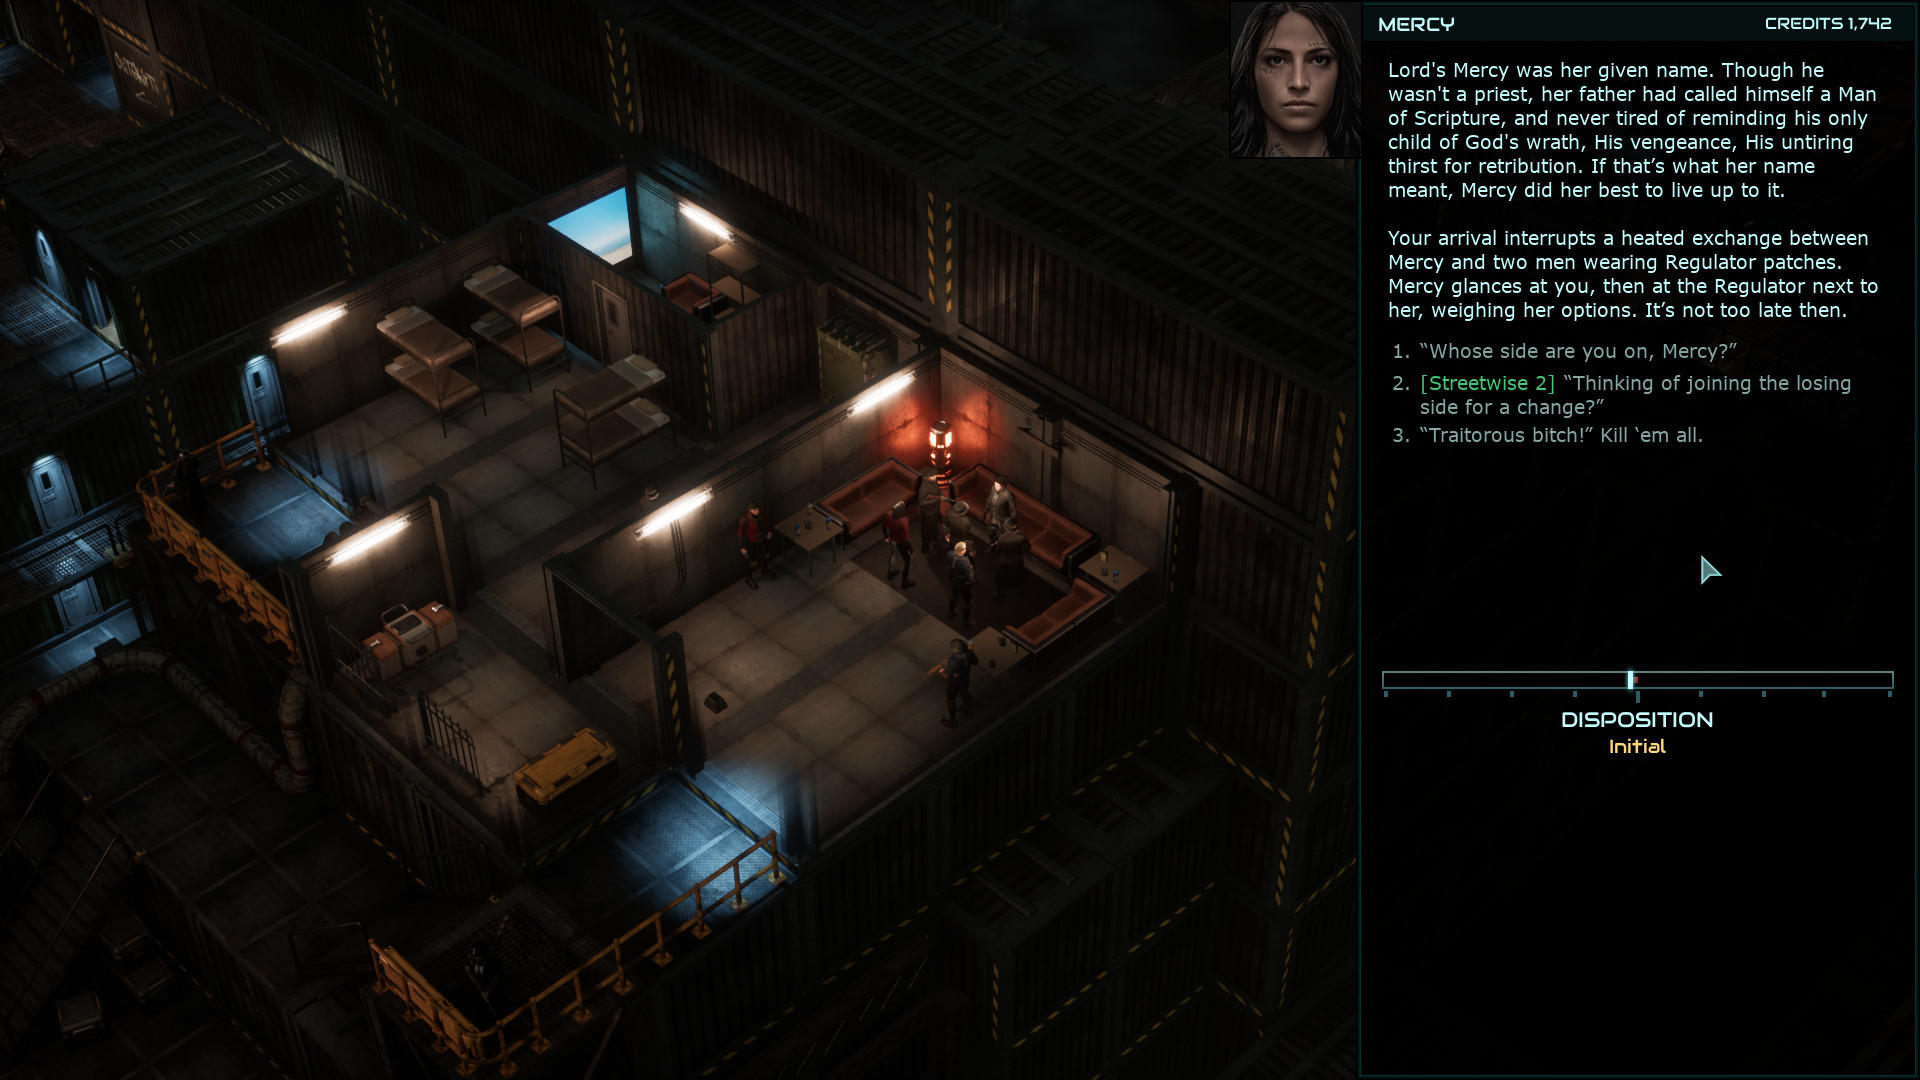 Colony Ship: A Post-Earth Role Playing Game 게임 스크린 샷